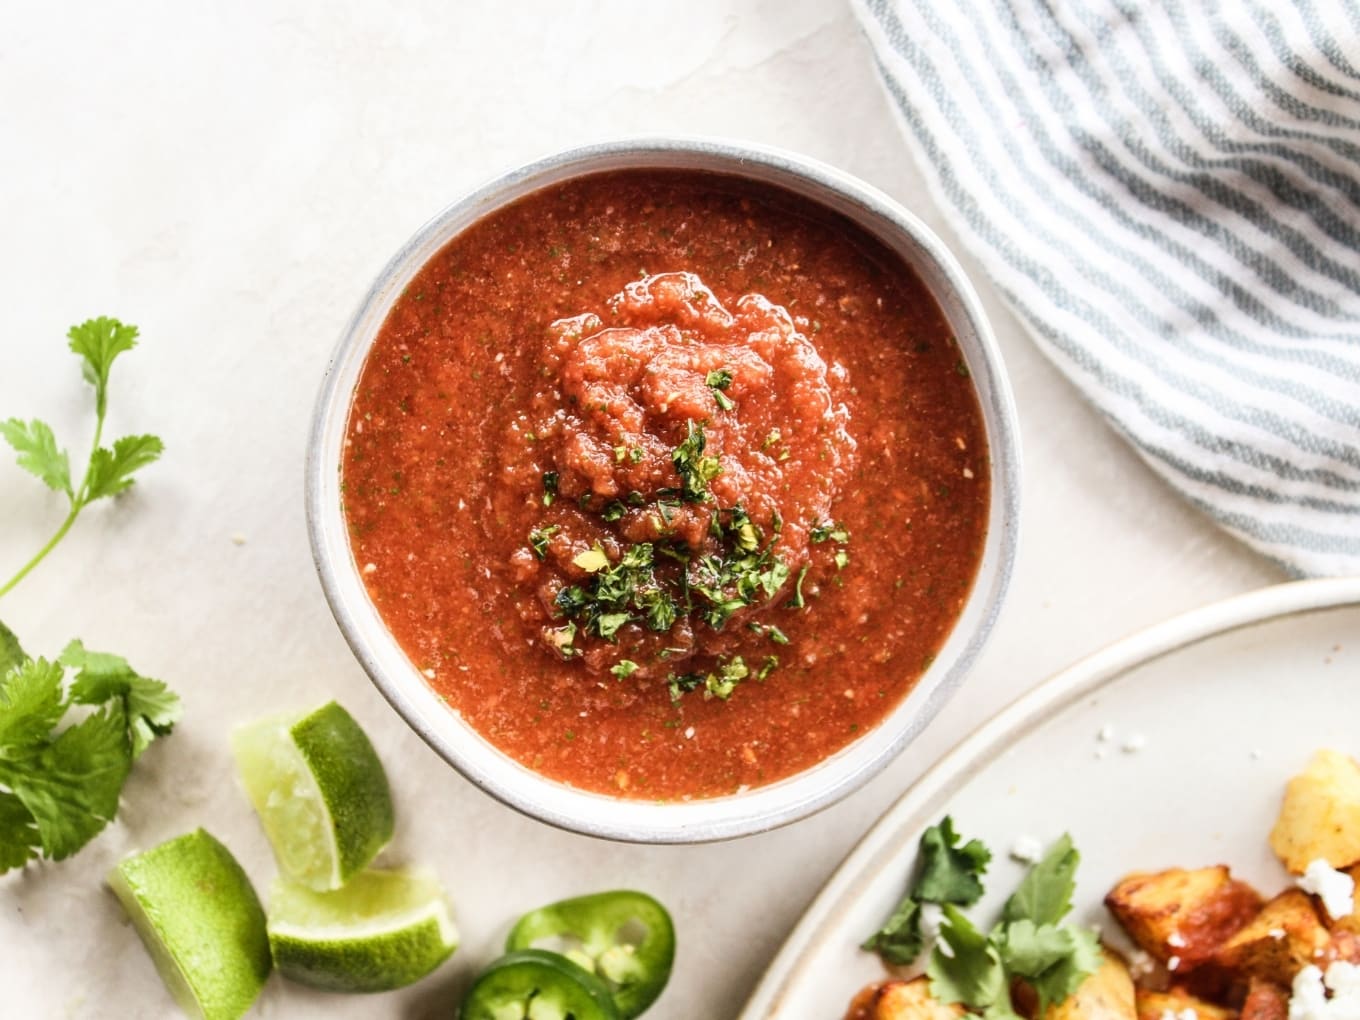 https://thewholecook.com/wp-content/uploads/2021/02/5-Minute-Blender-Salsa-by-The-Whole-Cook-horizontal.jpg